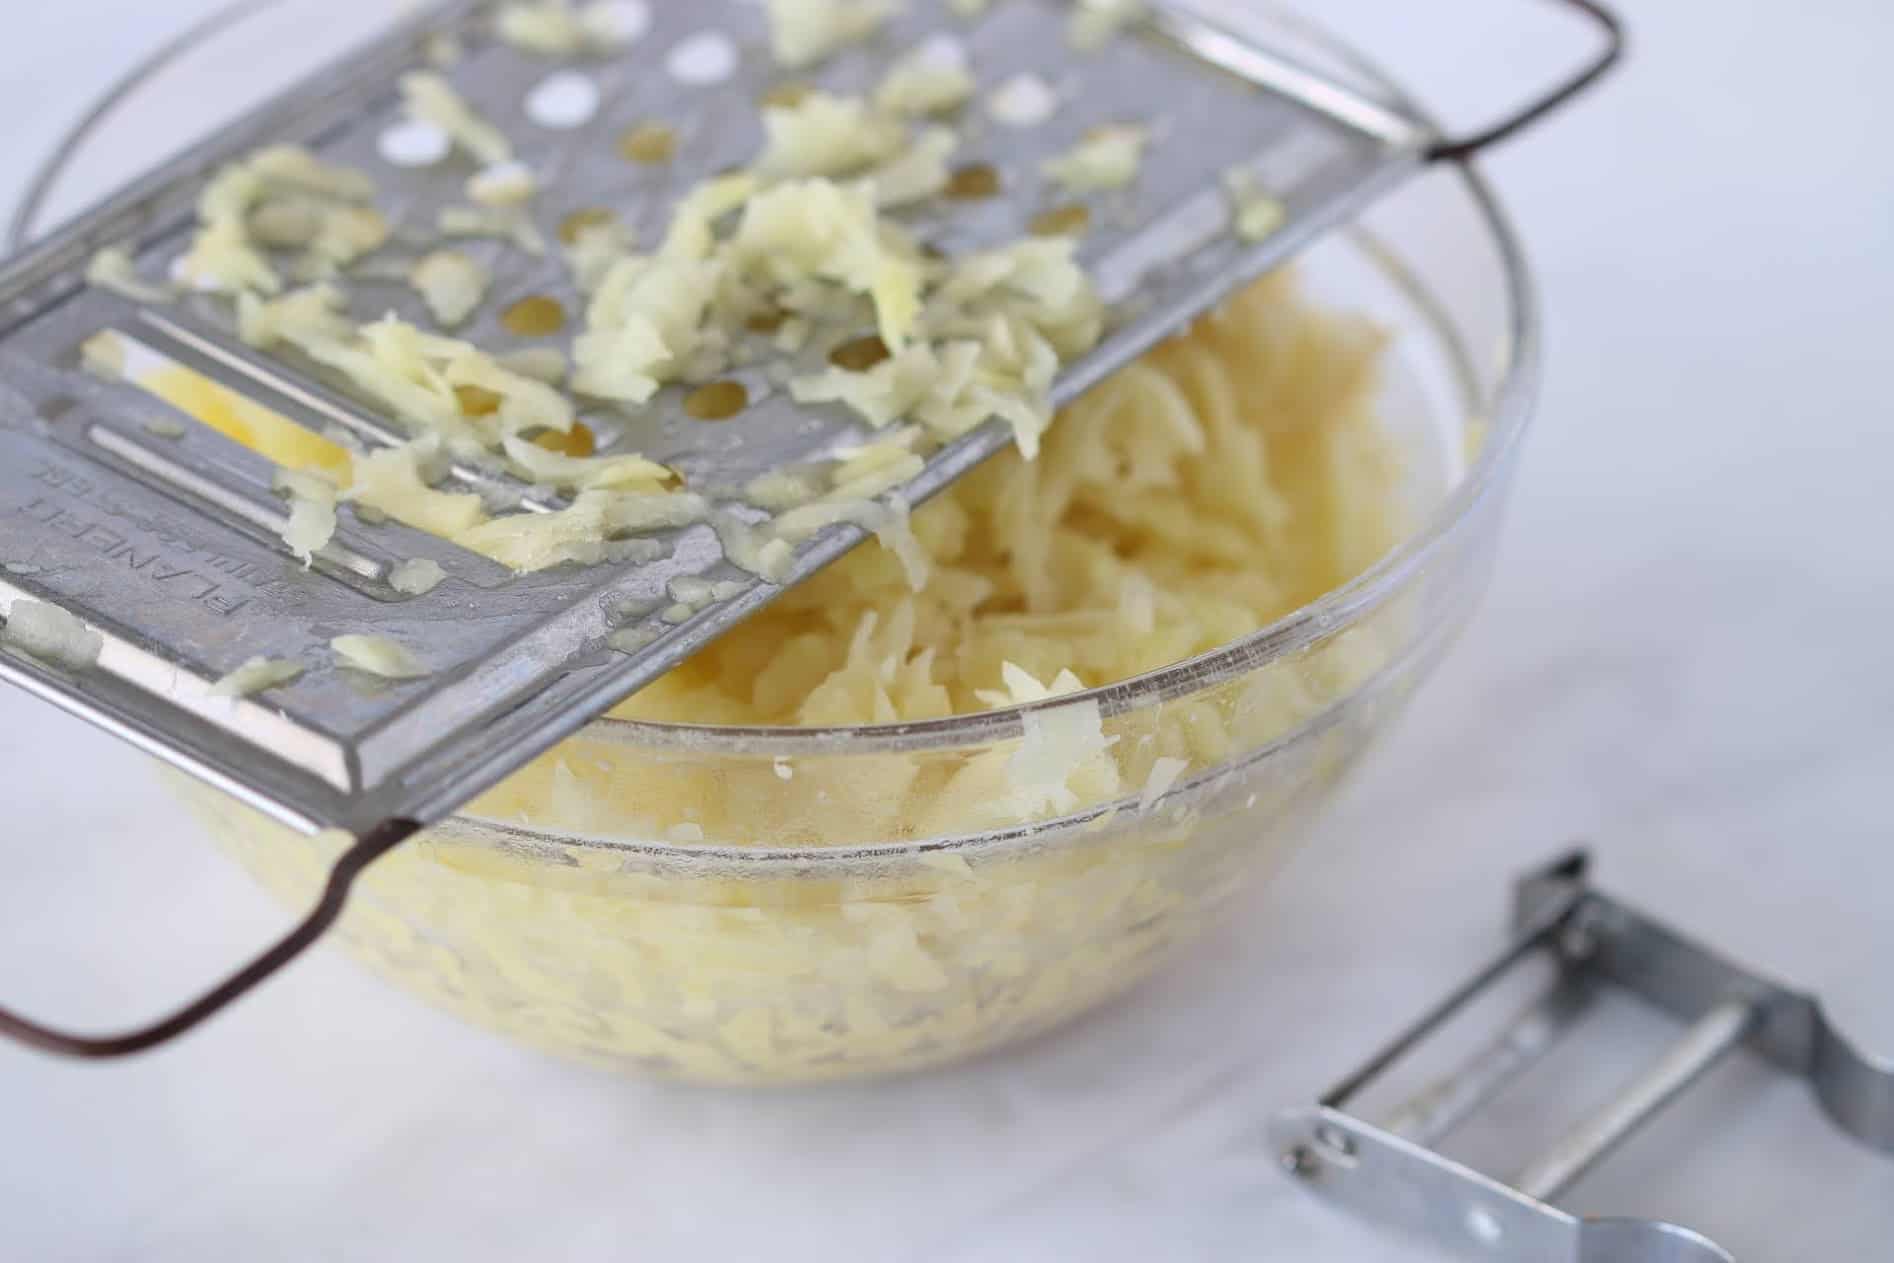 grated potatoes in a bowl and a grater